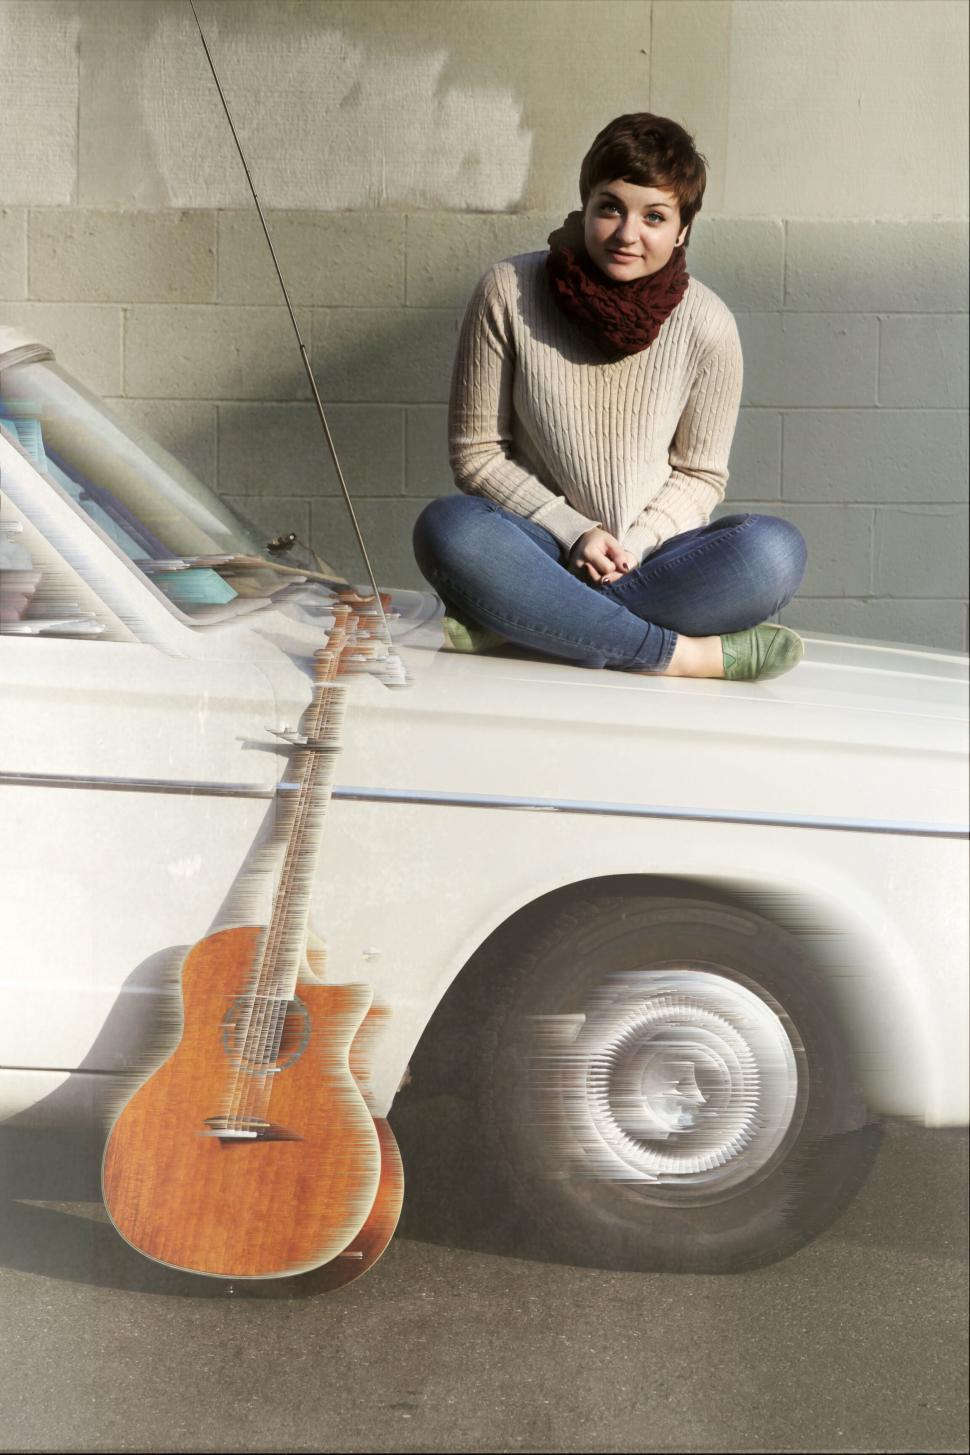 Free Image of Woman sitting with guitar by classic car 